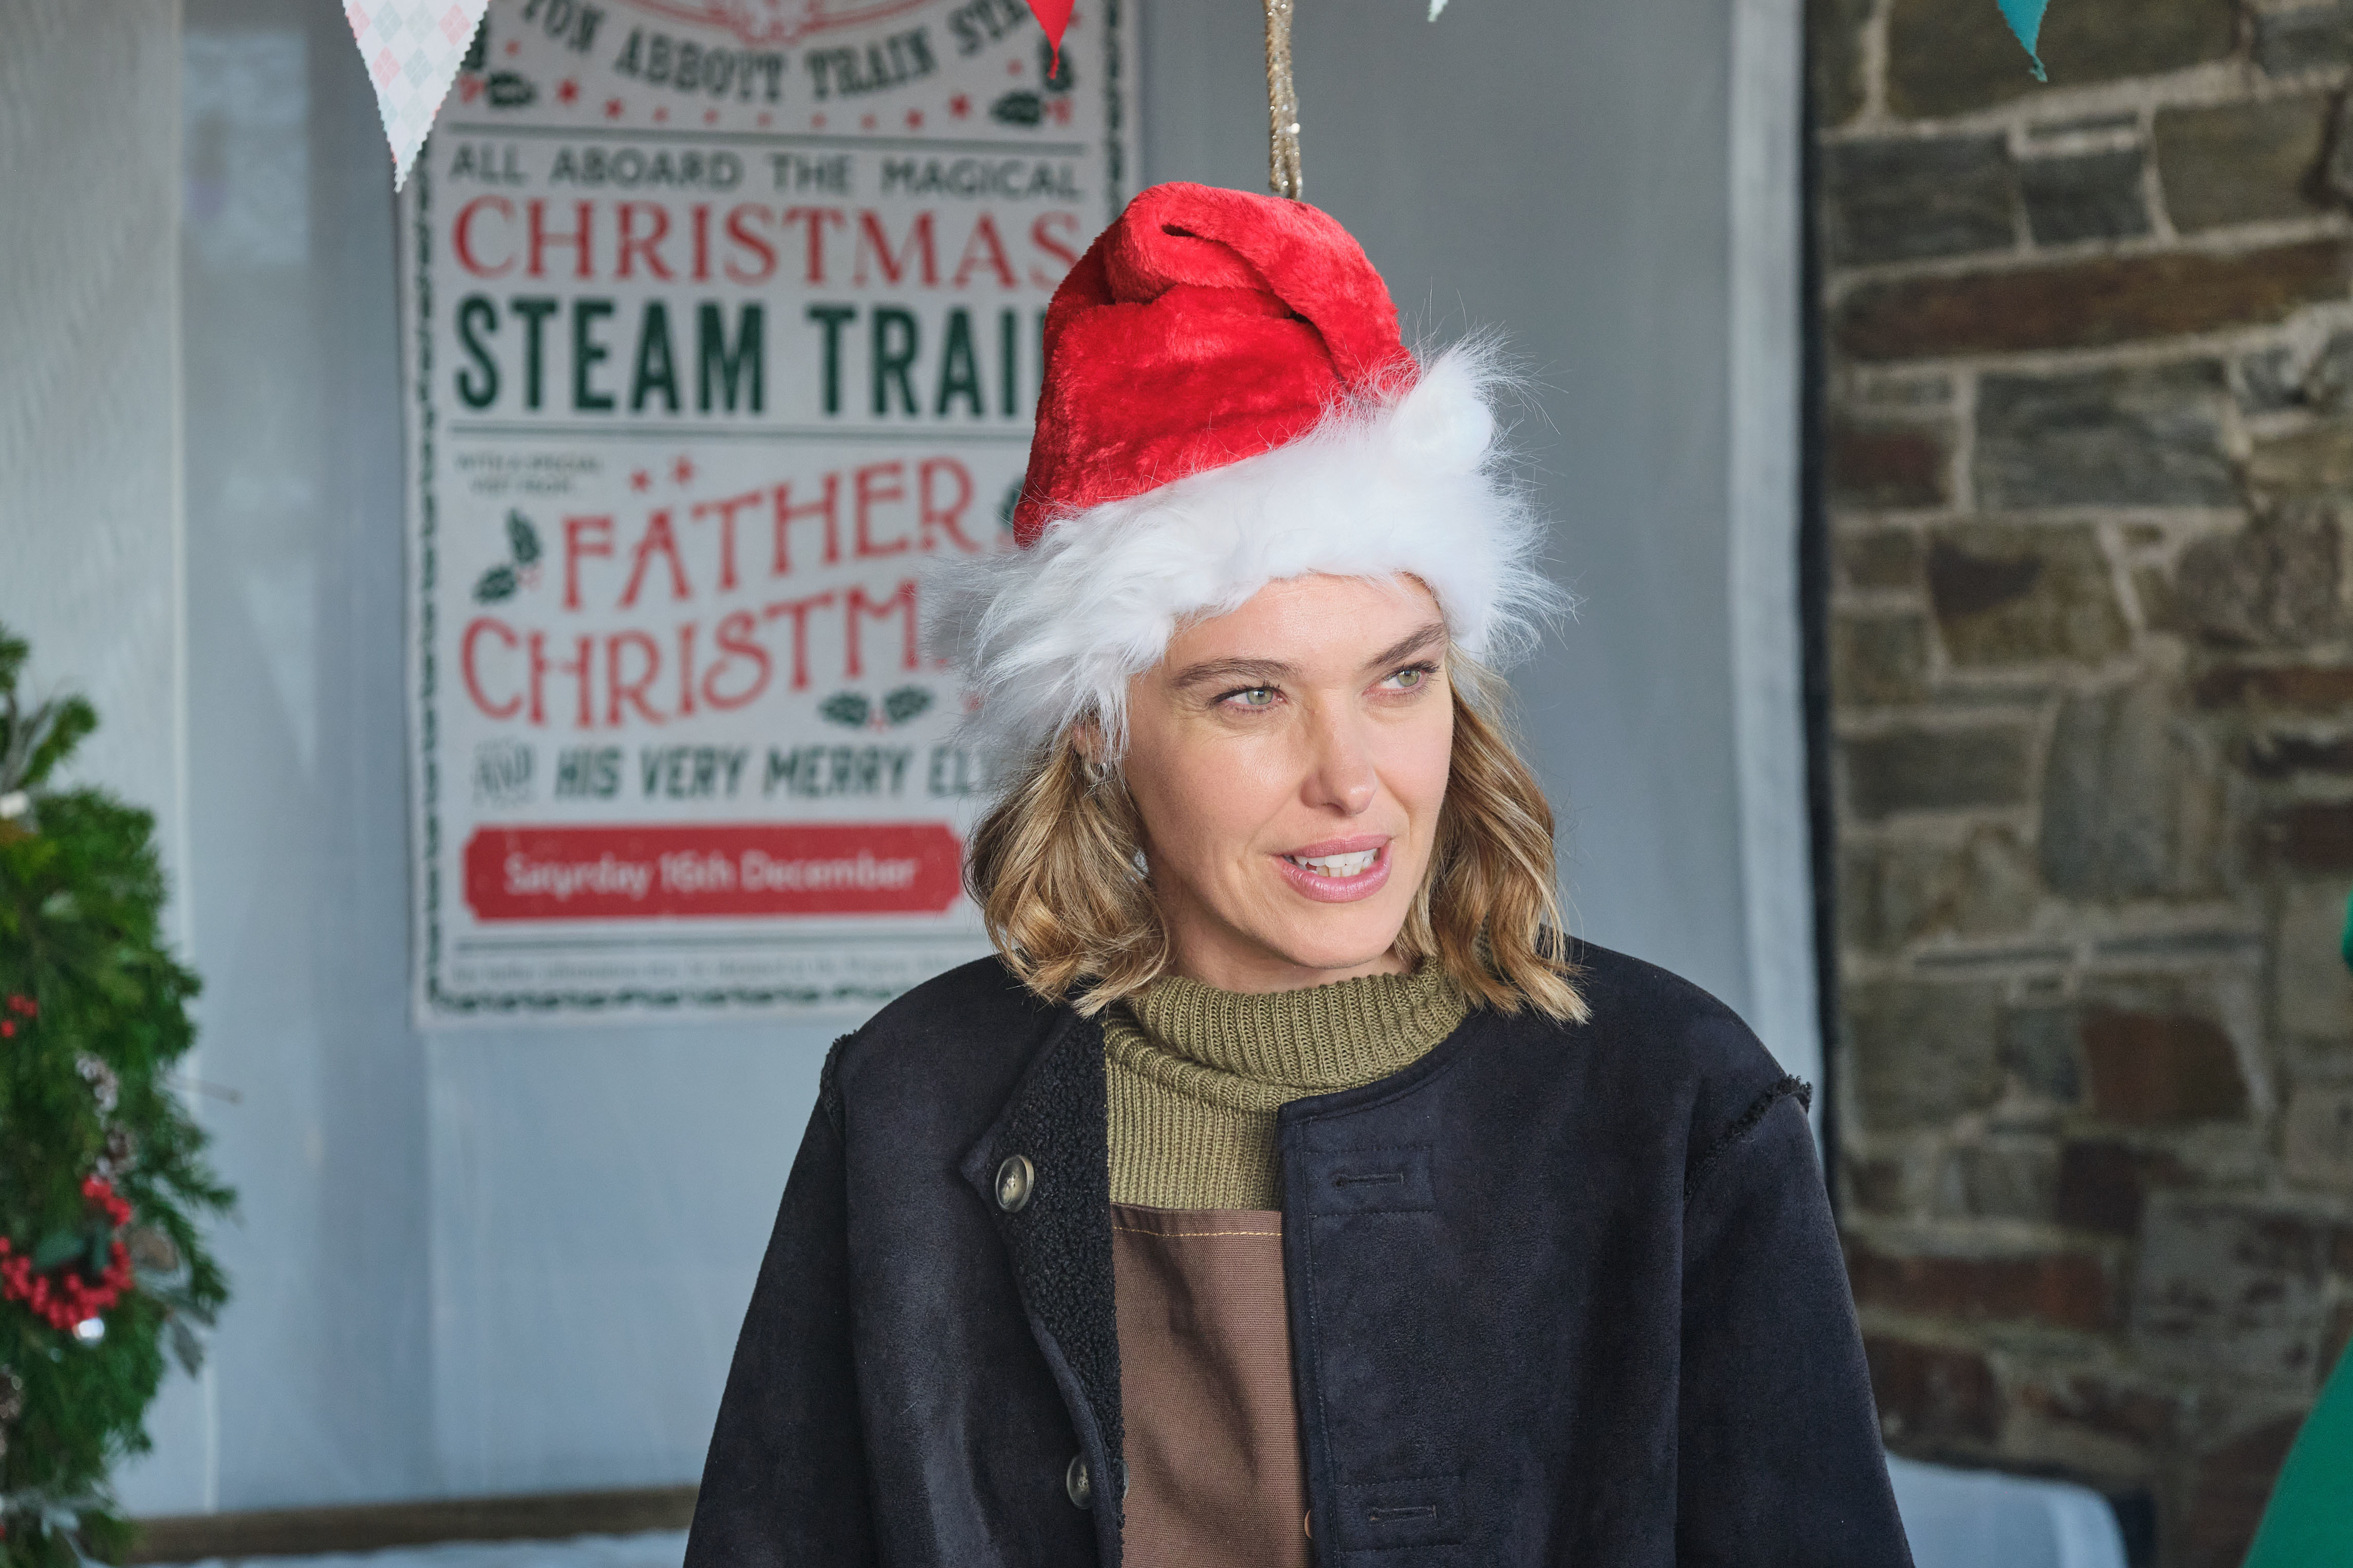 Martha (Sally Bretton) stands at the Christmas market in Shipton Abbott wearing a Santa hat